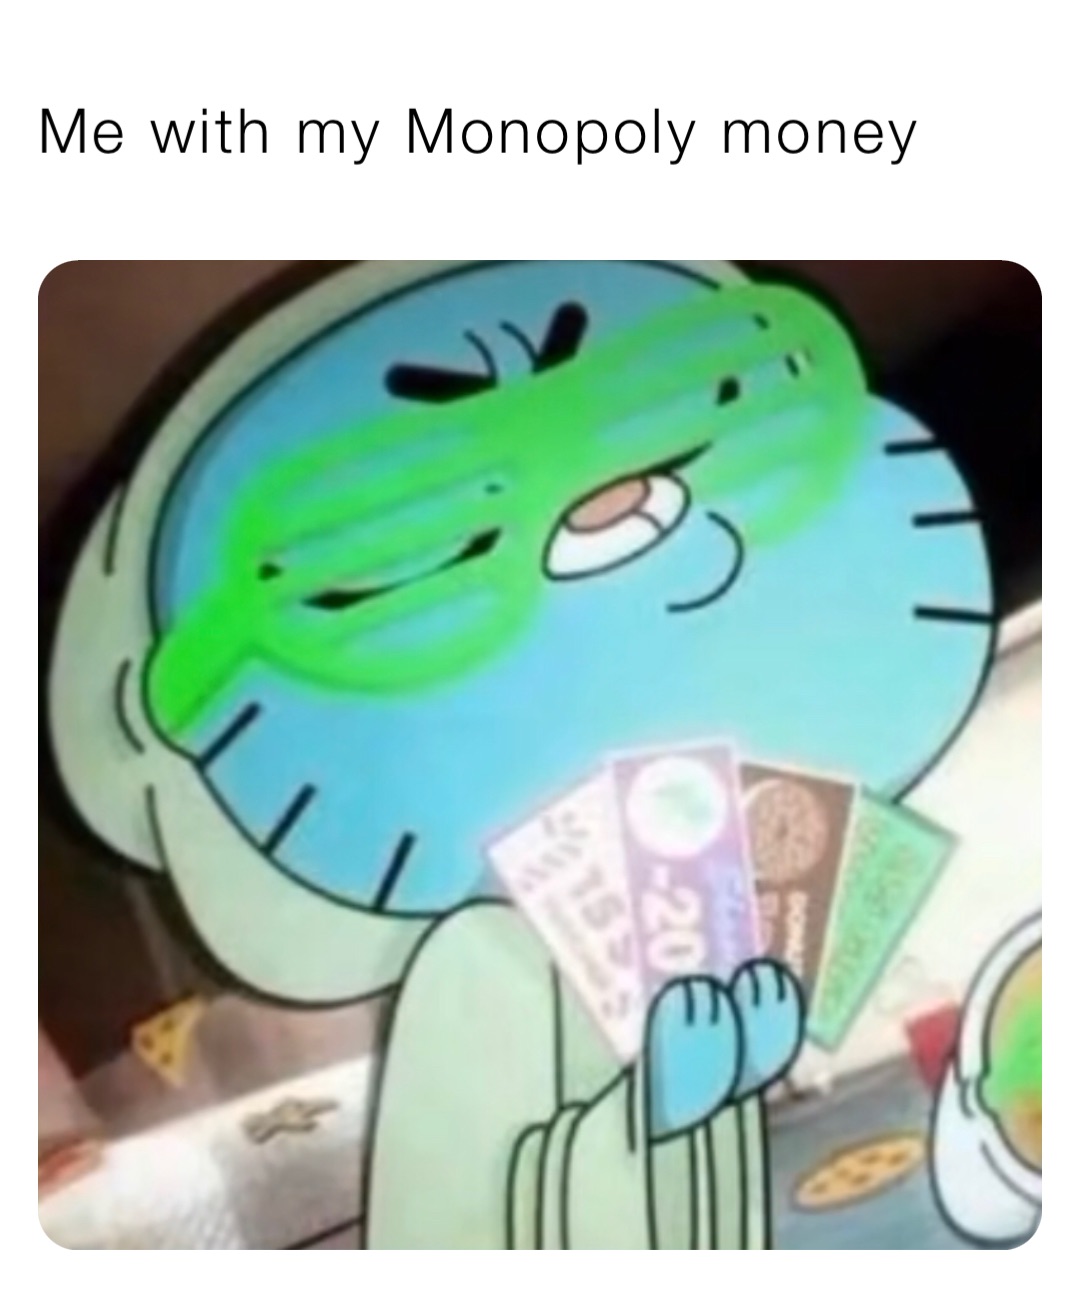 Me with my Monopoly money